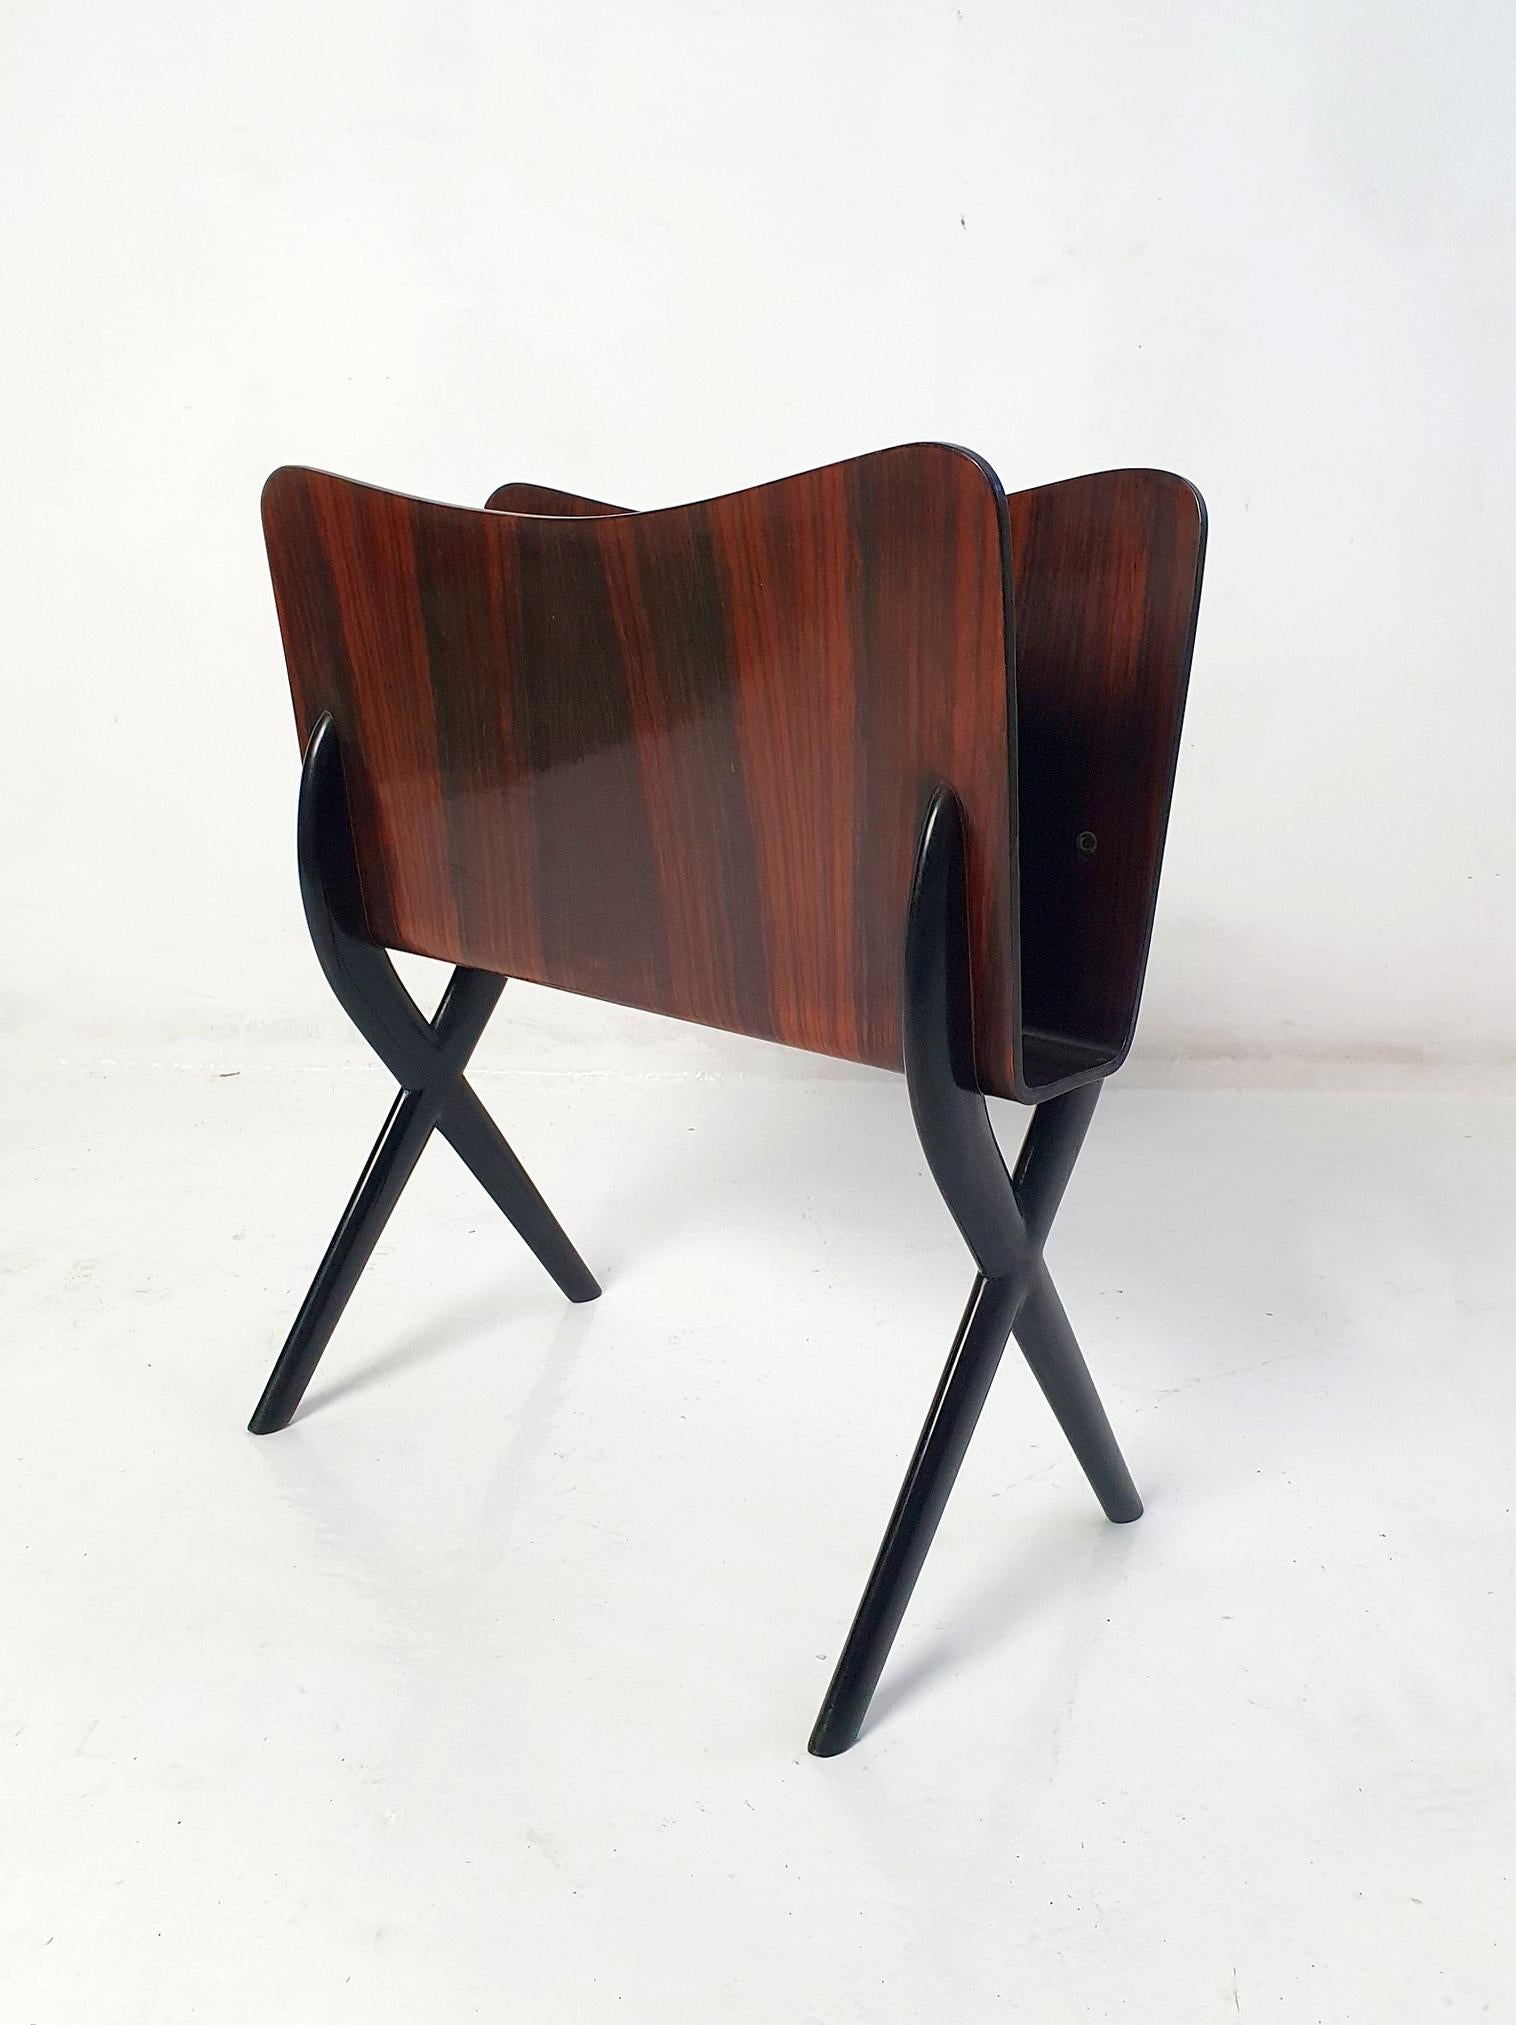 Introducing a professionally restored sleek and stylish midcentury magazine rack, reminiscent of the iconic designs by Ico Parisi. Produced in Italy during the vibrant 1950s, this walnut masterpiece exudes an undeniable cool factor. Its impeccable